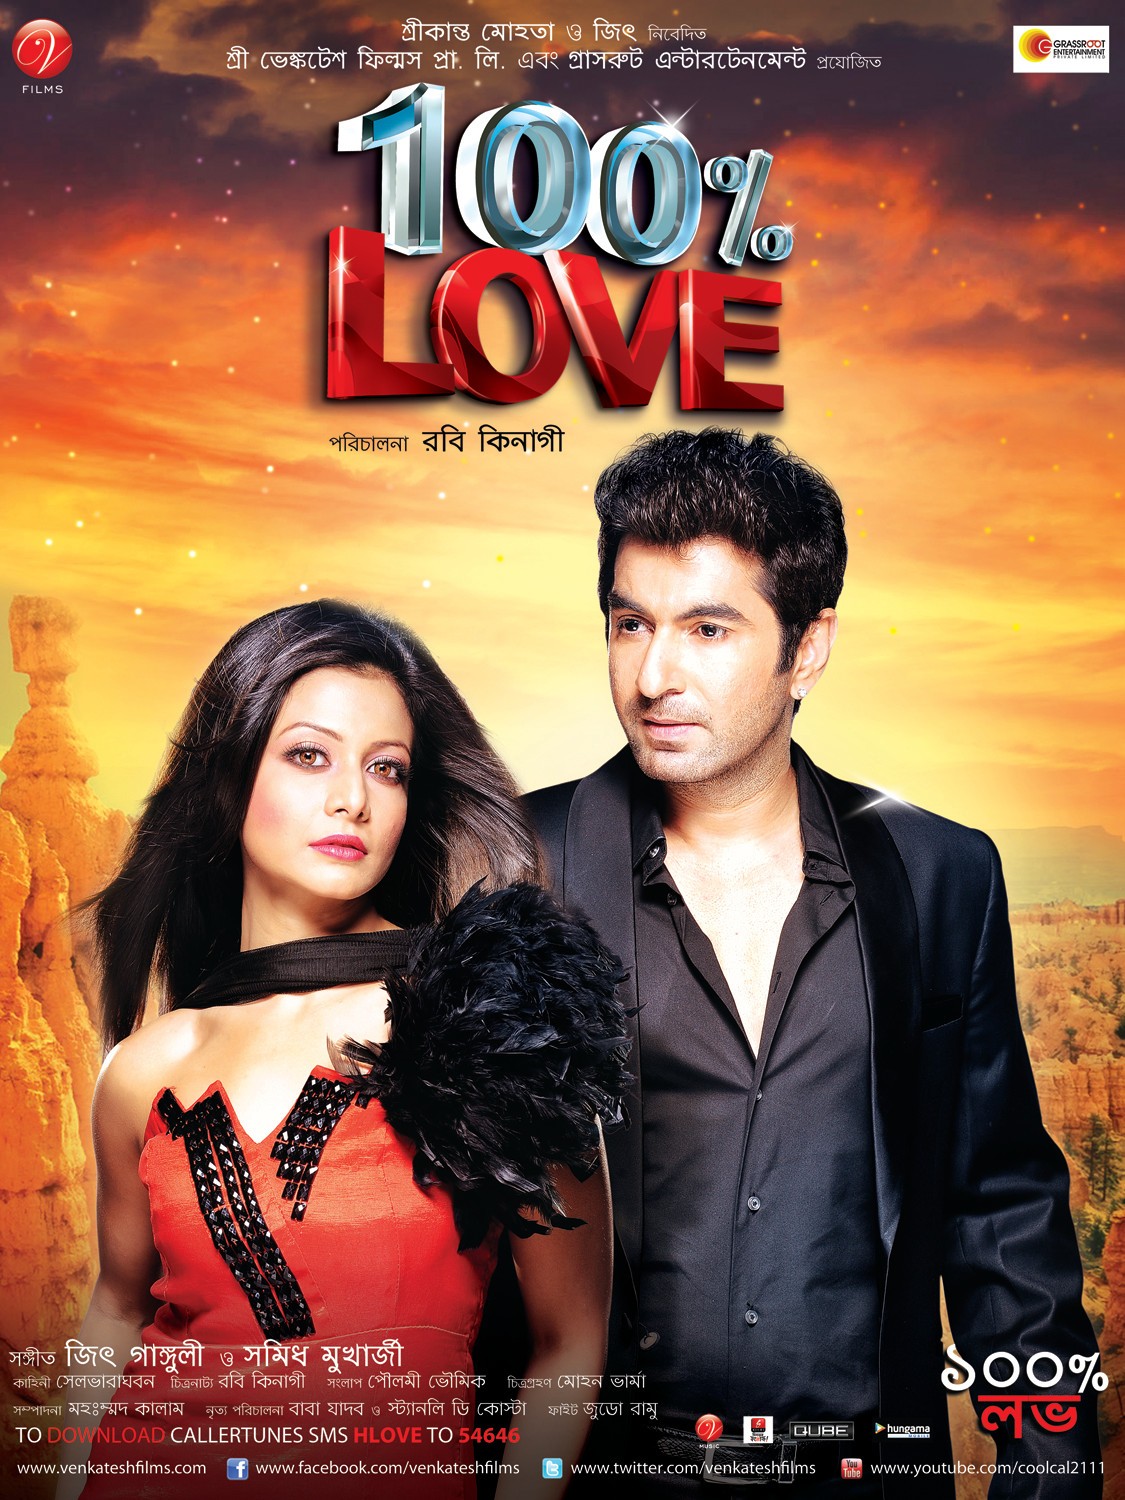 Extra Large Movie Poster Image for 100% Love (#7 of 13)